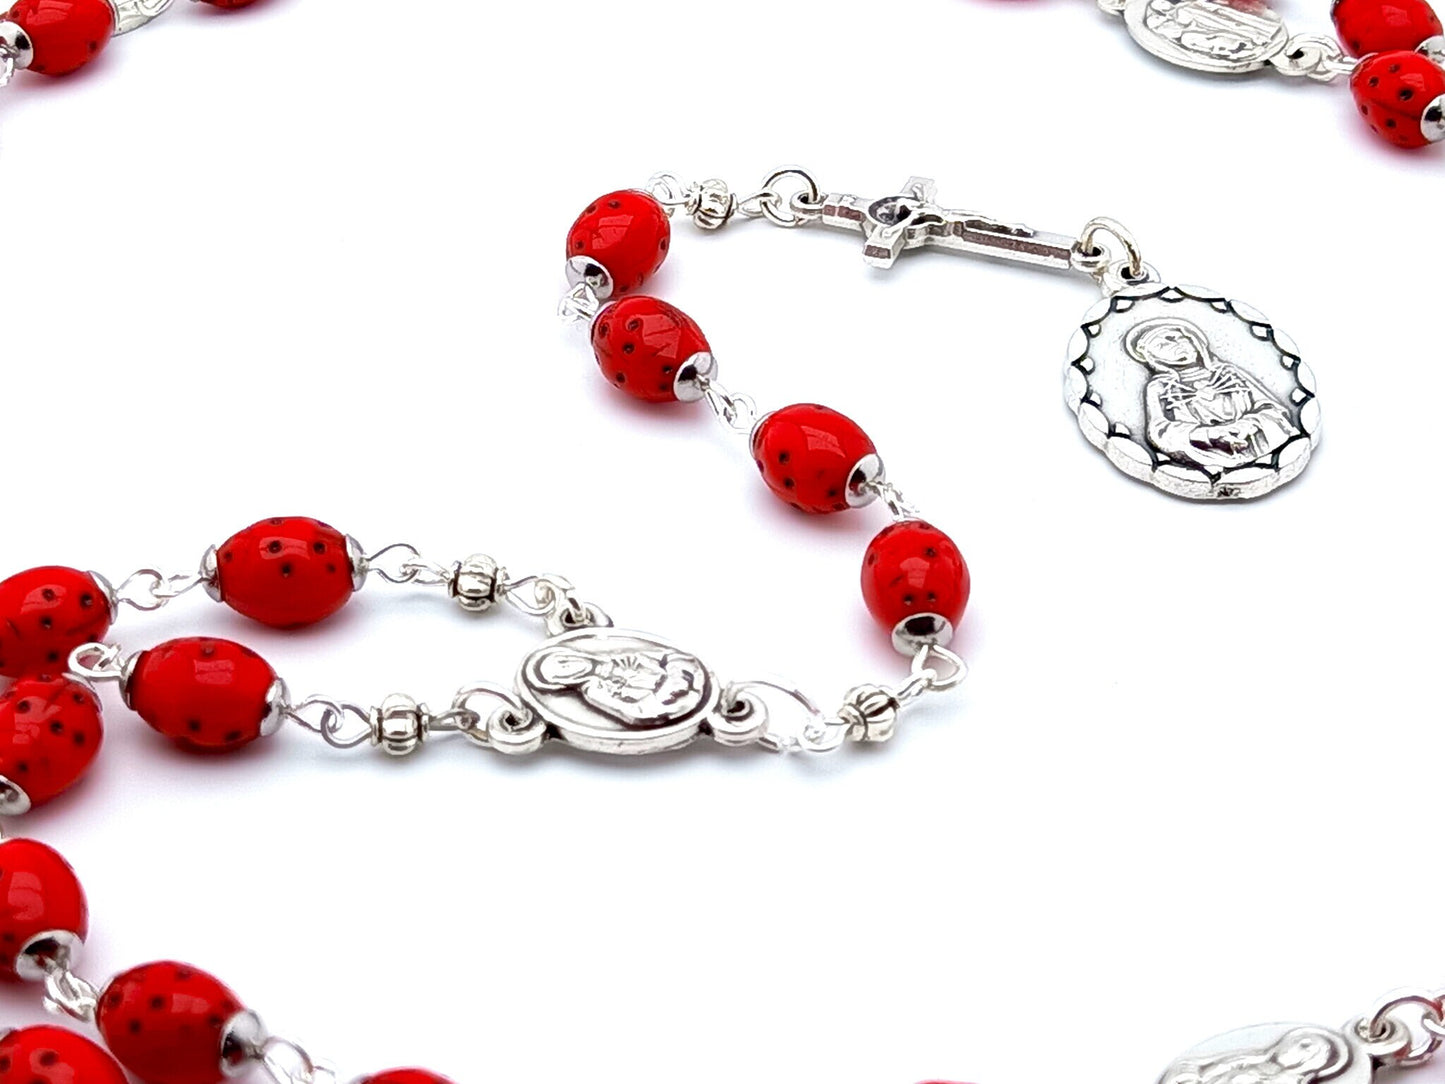 Our Lady of Sorrows unique rosary beads dolor rosary with red lady bug beads, silver Saint Benedict crucifix and medals.